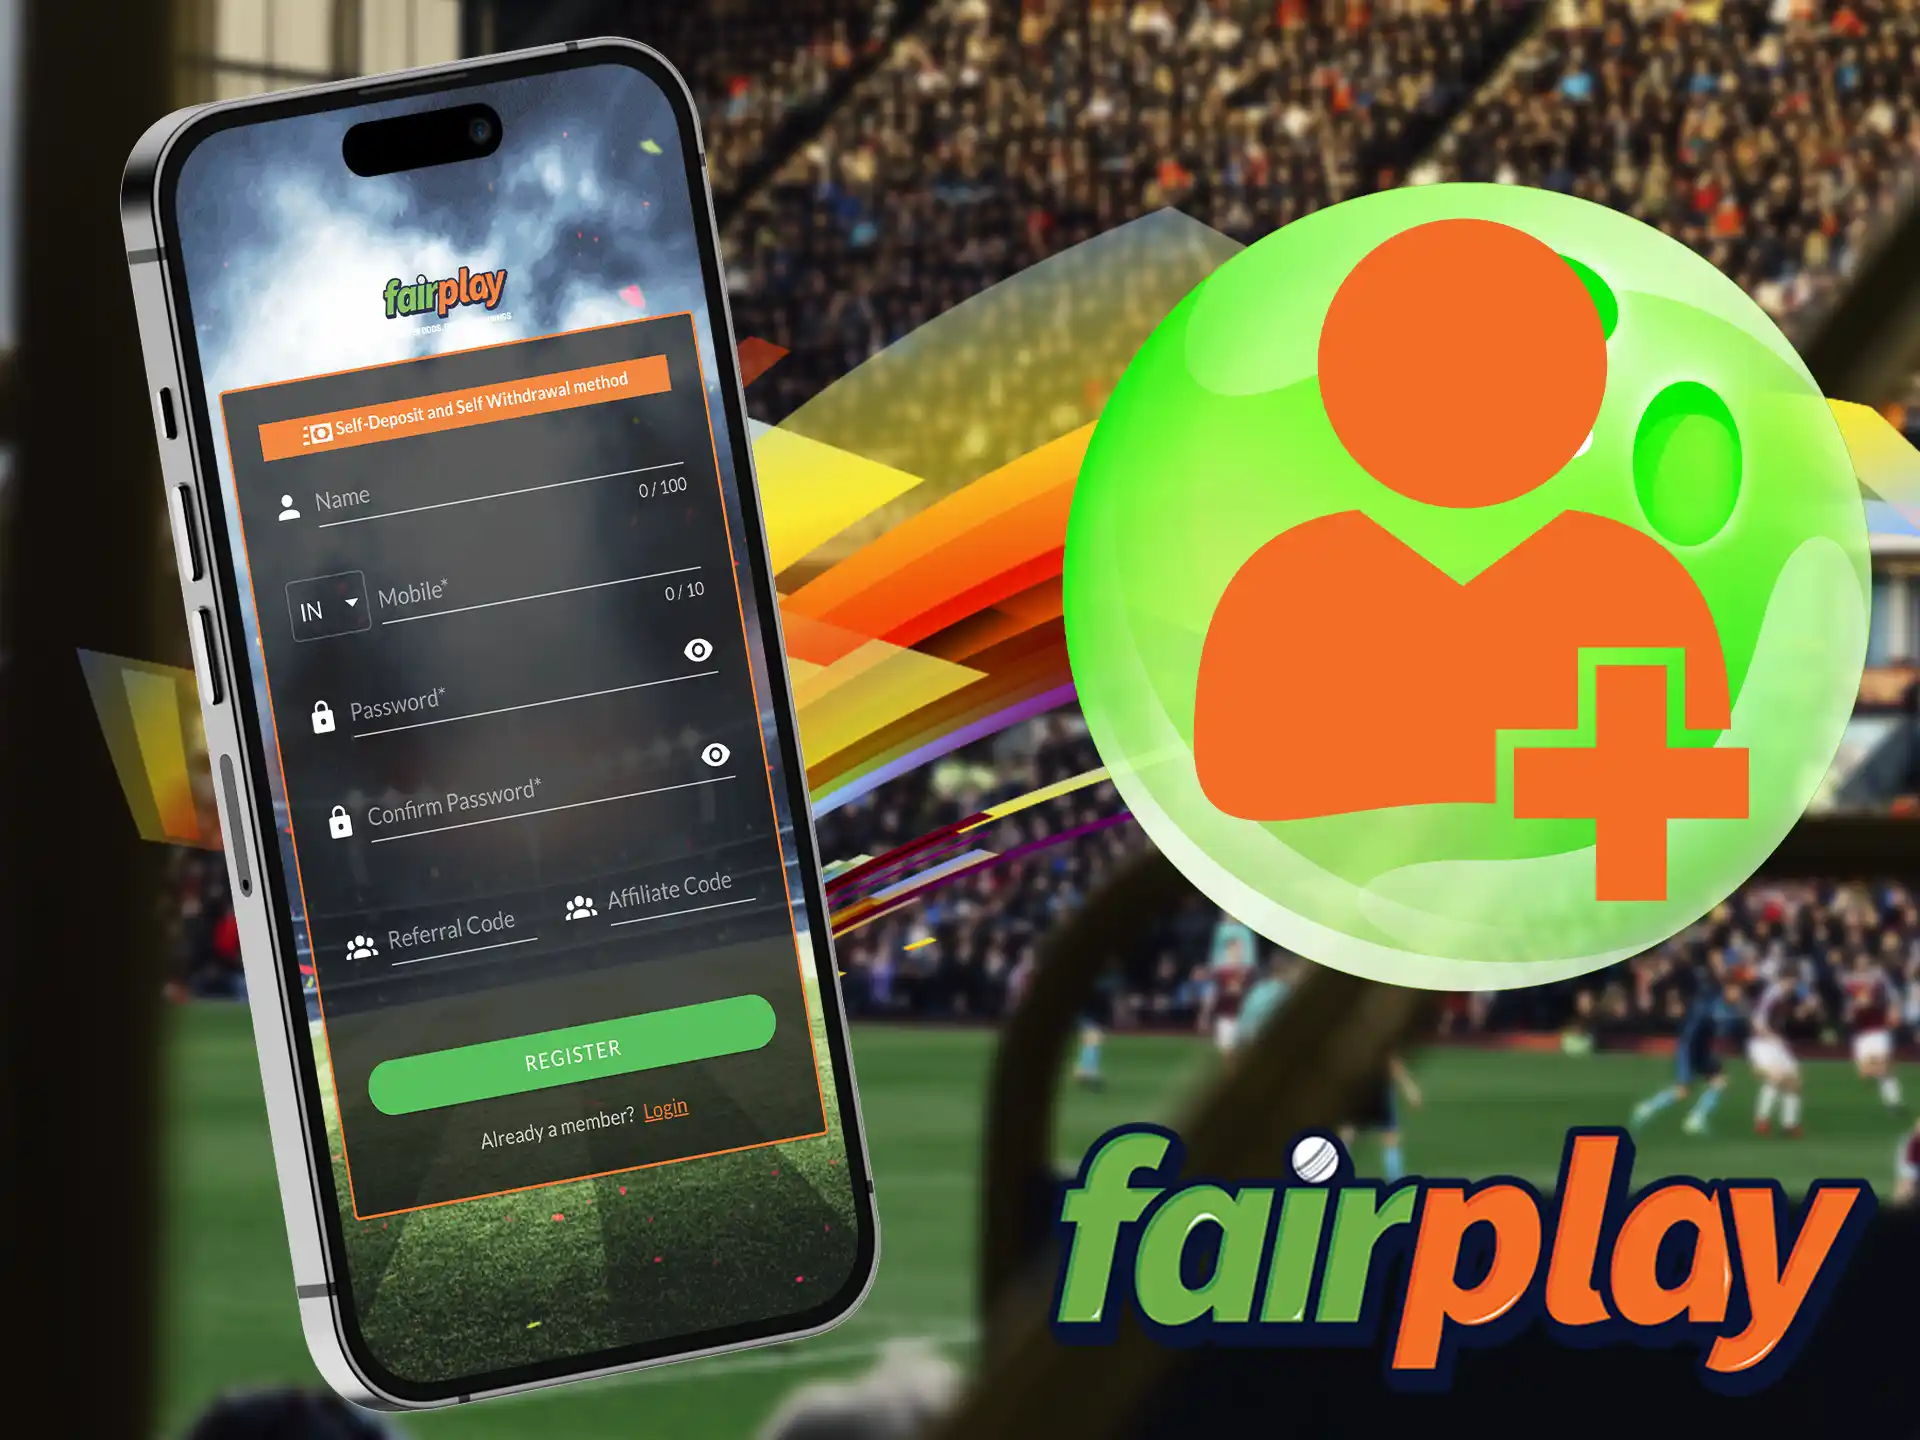 Place your bets from the comfort of your own home by simply downloading the official Fairplay app.